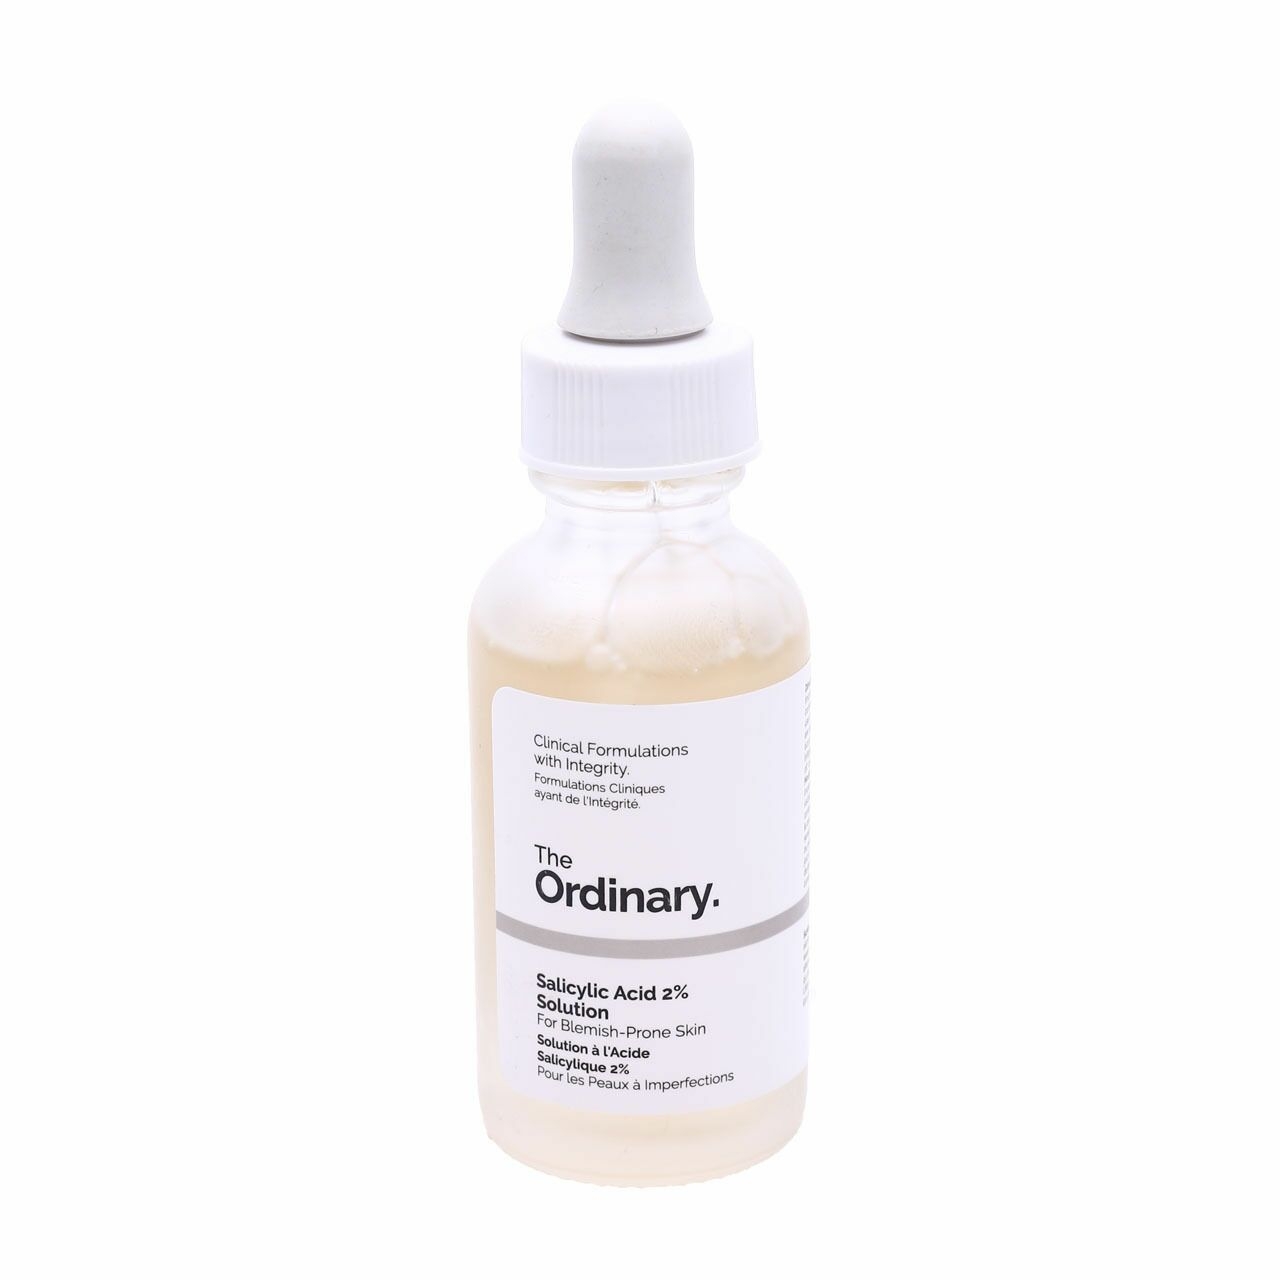 The Ordinary Salicylid Acid 2% Solution Skin Care